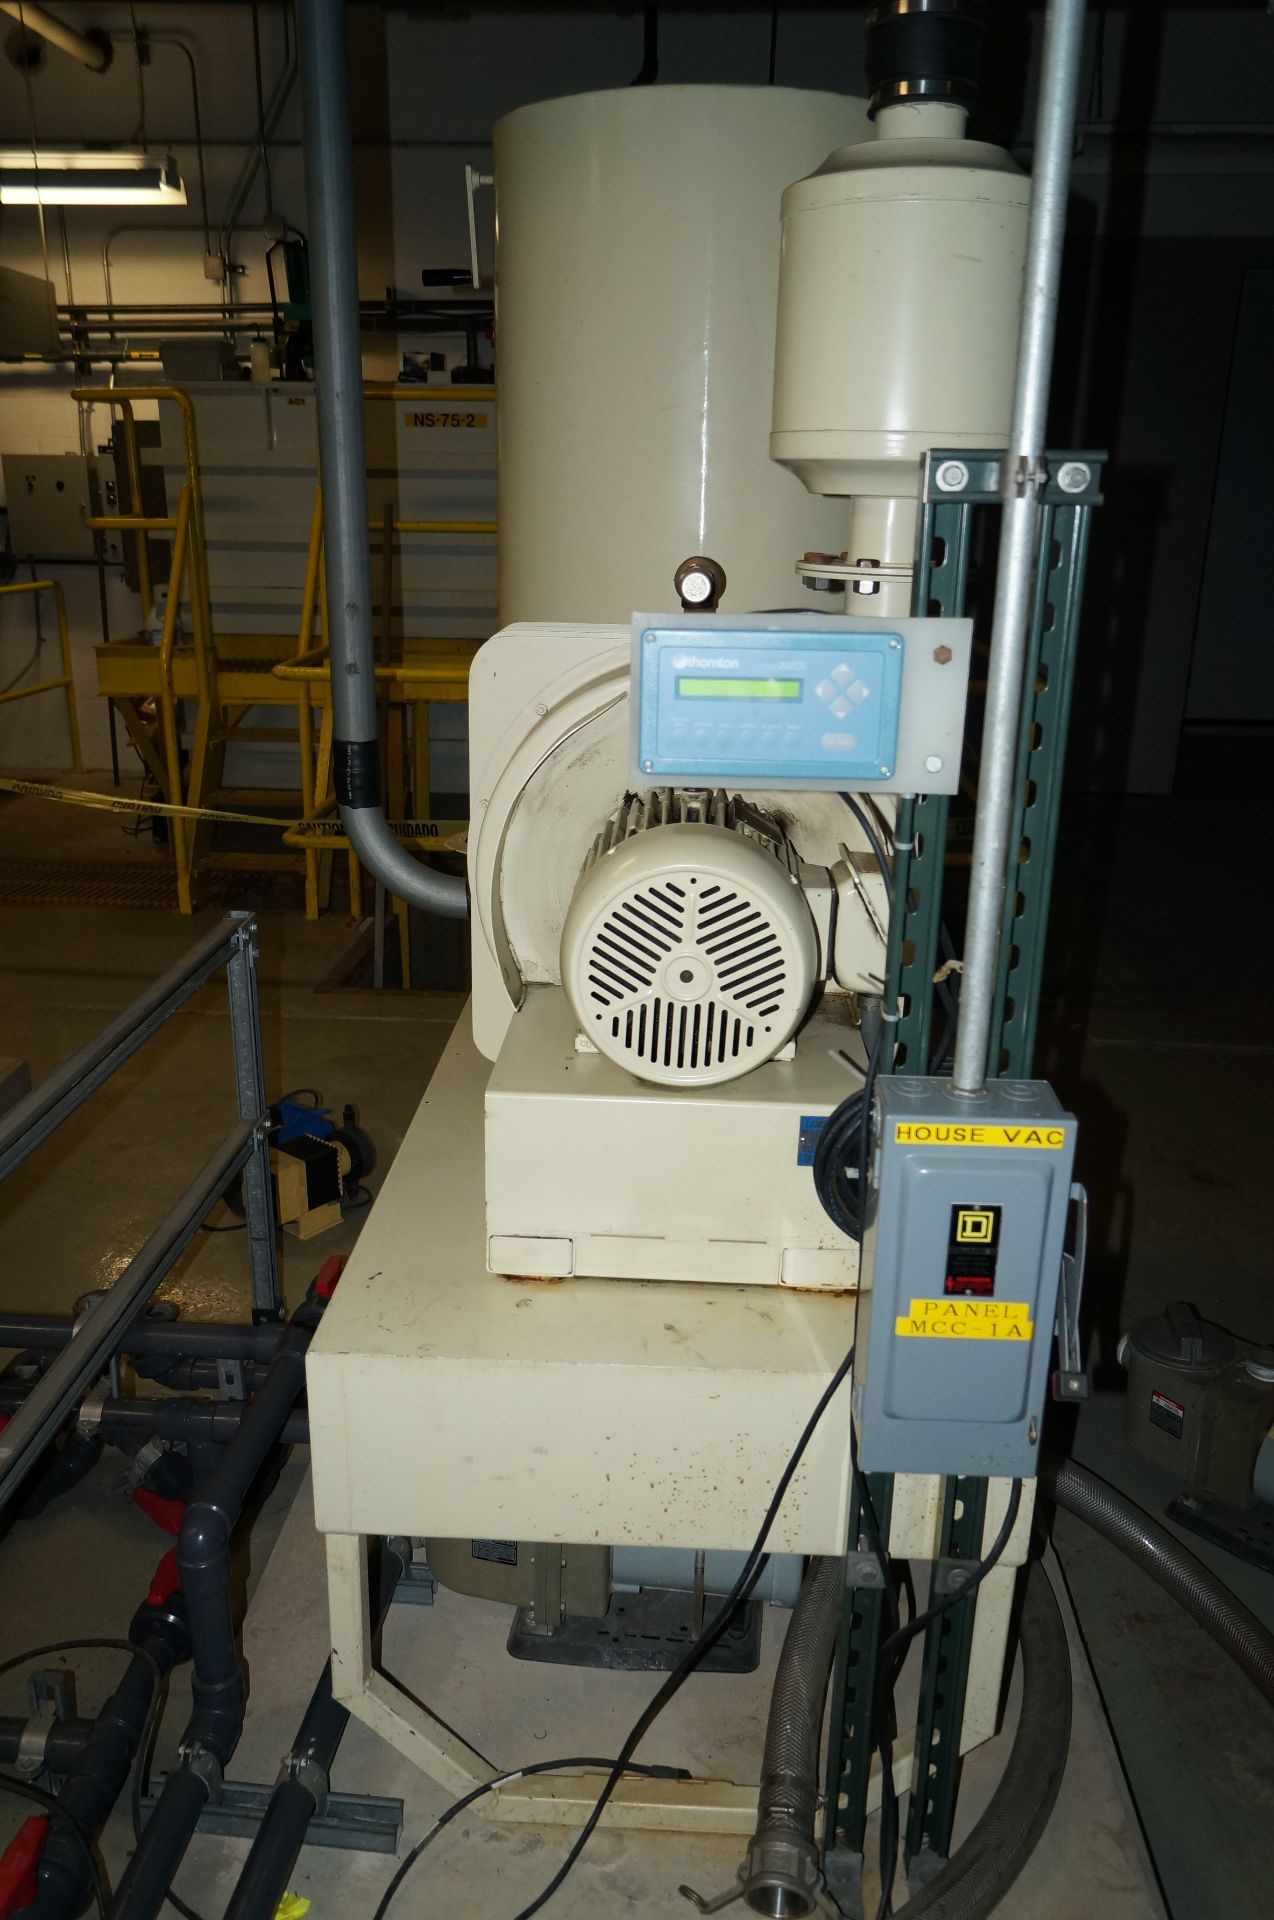 LAMSON SUPERVAC SYSTEM, MODEL - TST -610 , MULTI STAGE CENTRIFUGAL , 7 BAGS, WITH COLLECTION POT AND - Image 3 of 7